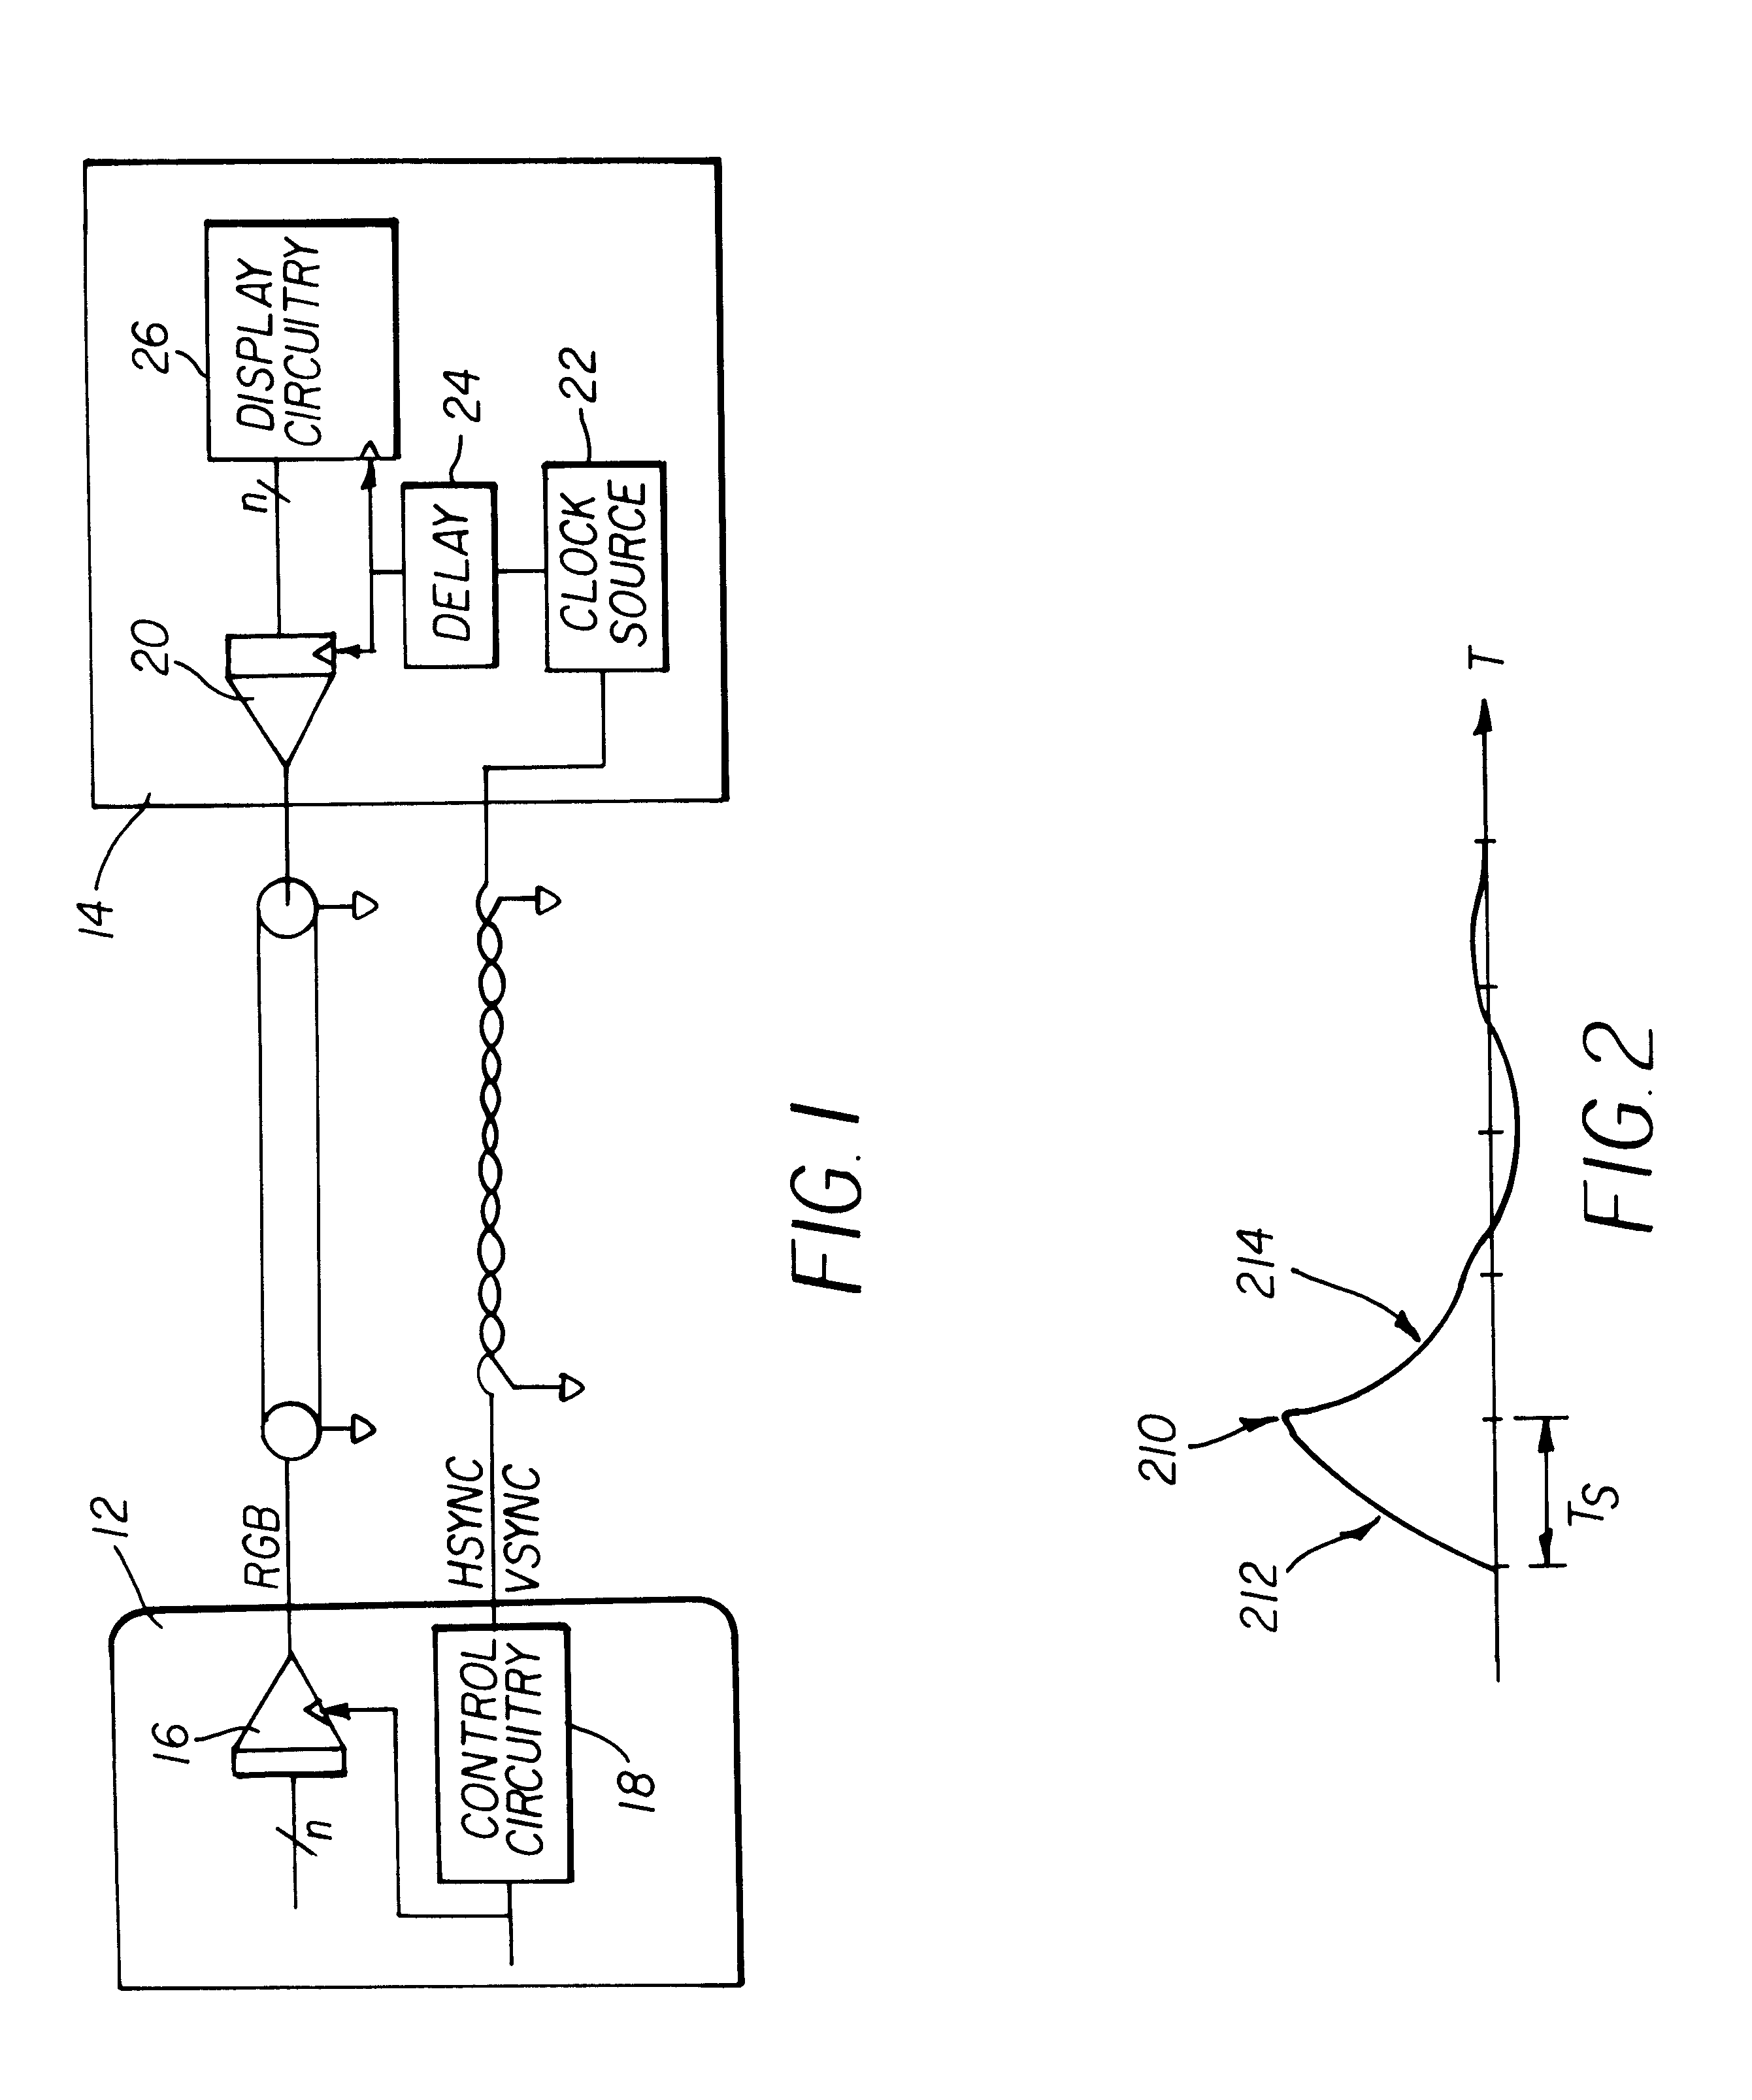 Method and apparatus implemented in an automatic sampling phase control system for digital monitors